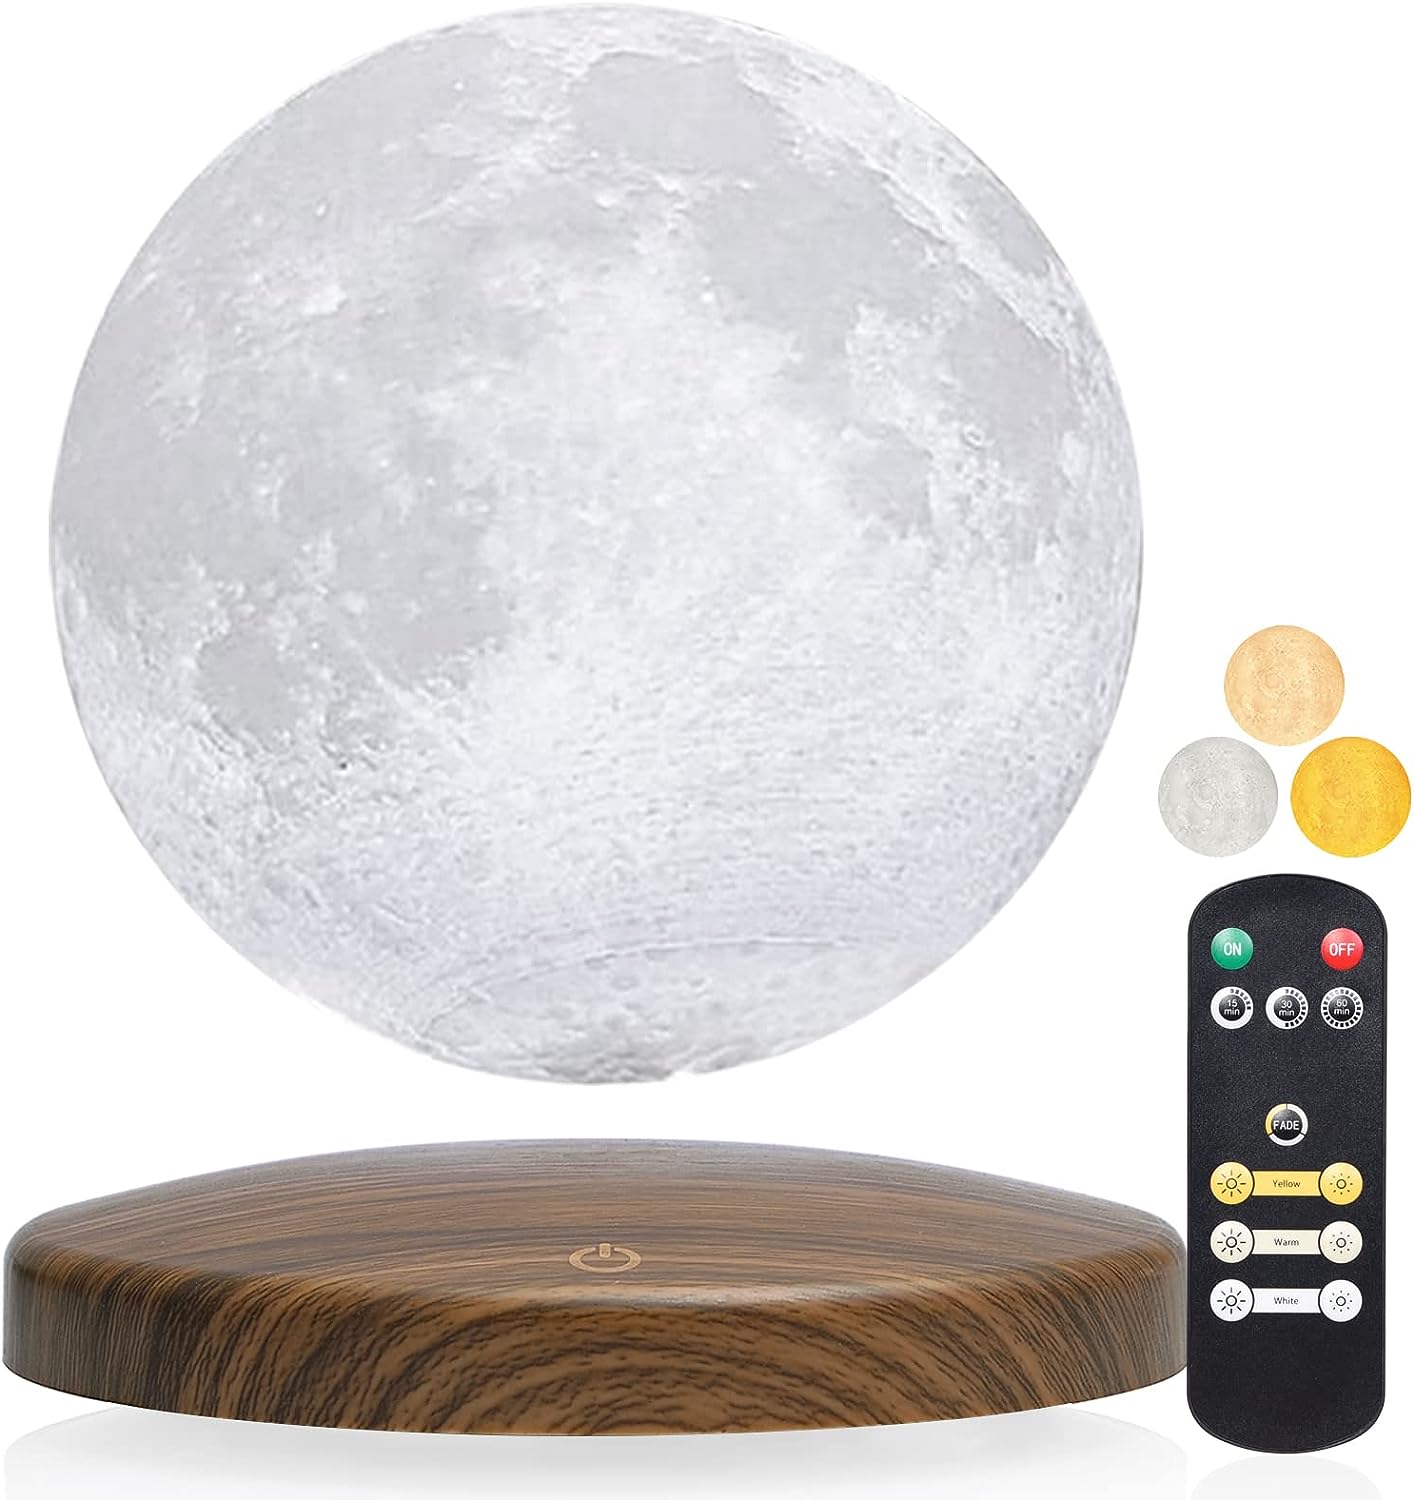 FIRPOW Levitating Moon Lamp 3 Colors Floating Moon Lamp 3D LED Floating Lamp Levitating Moon Magnetic with Remote, Adjustable Brightness, Timing, for Kids Lover Friends Office Home Decor - 6In